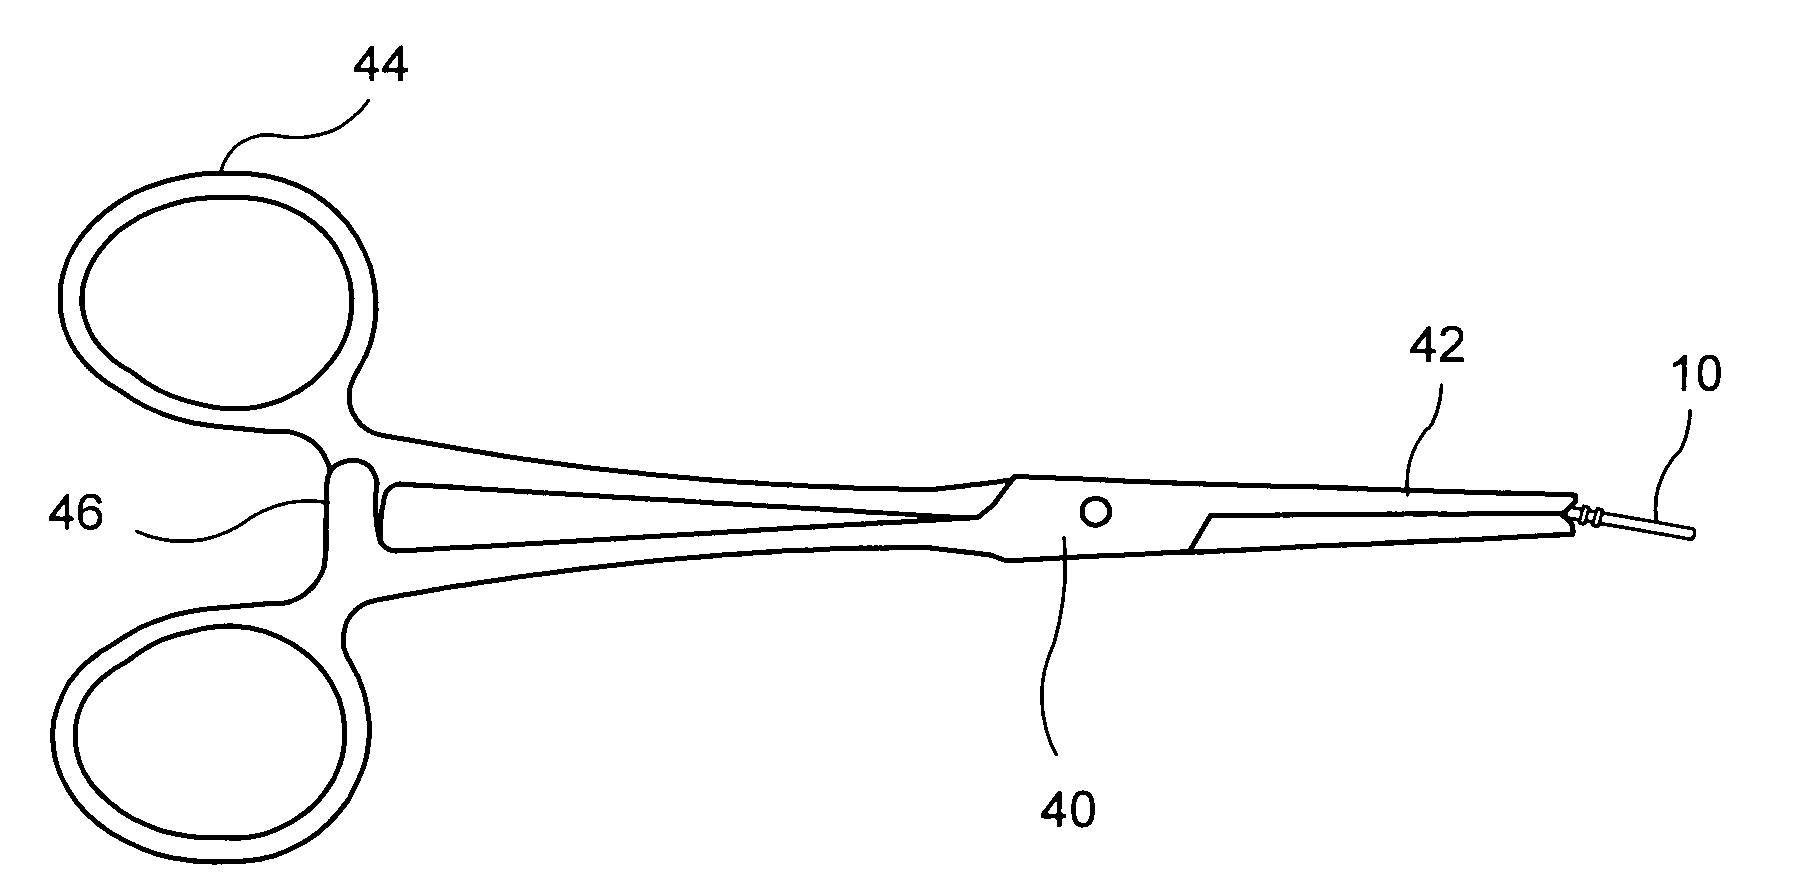 Carrier and seating instrument for dental devices